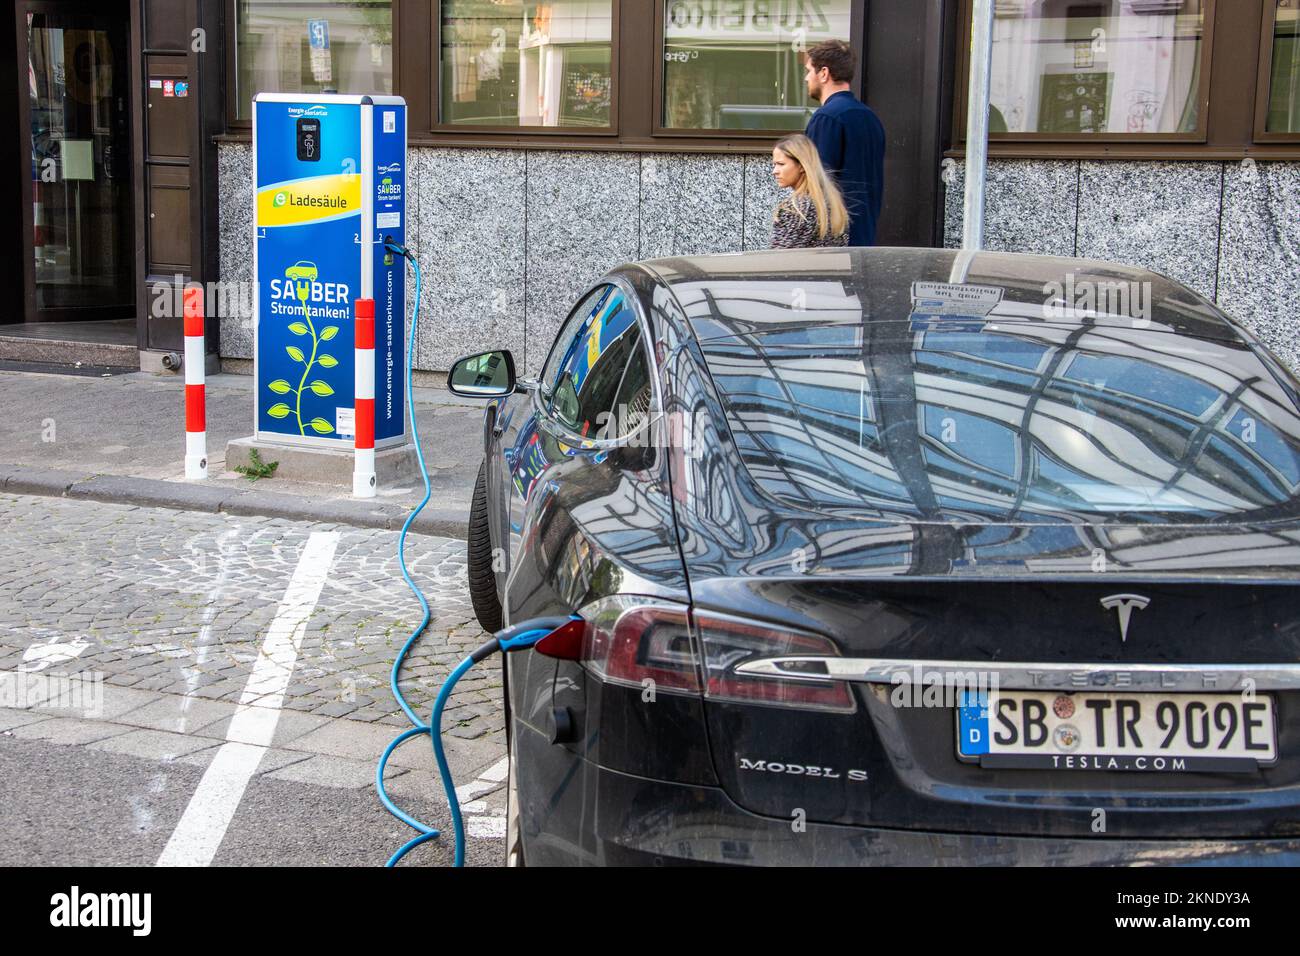 Tesla charging at a Ladesaule EV electric vehicle charger, Saarbruck, Germany Stock Photo